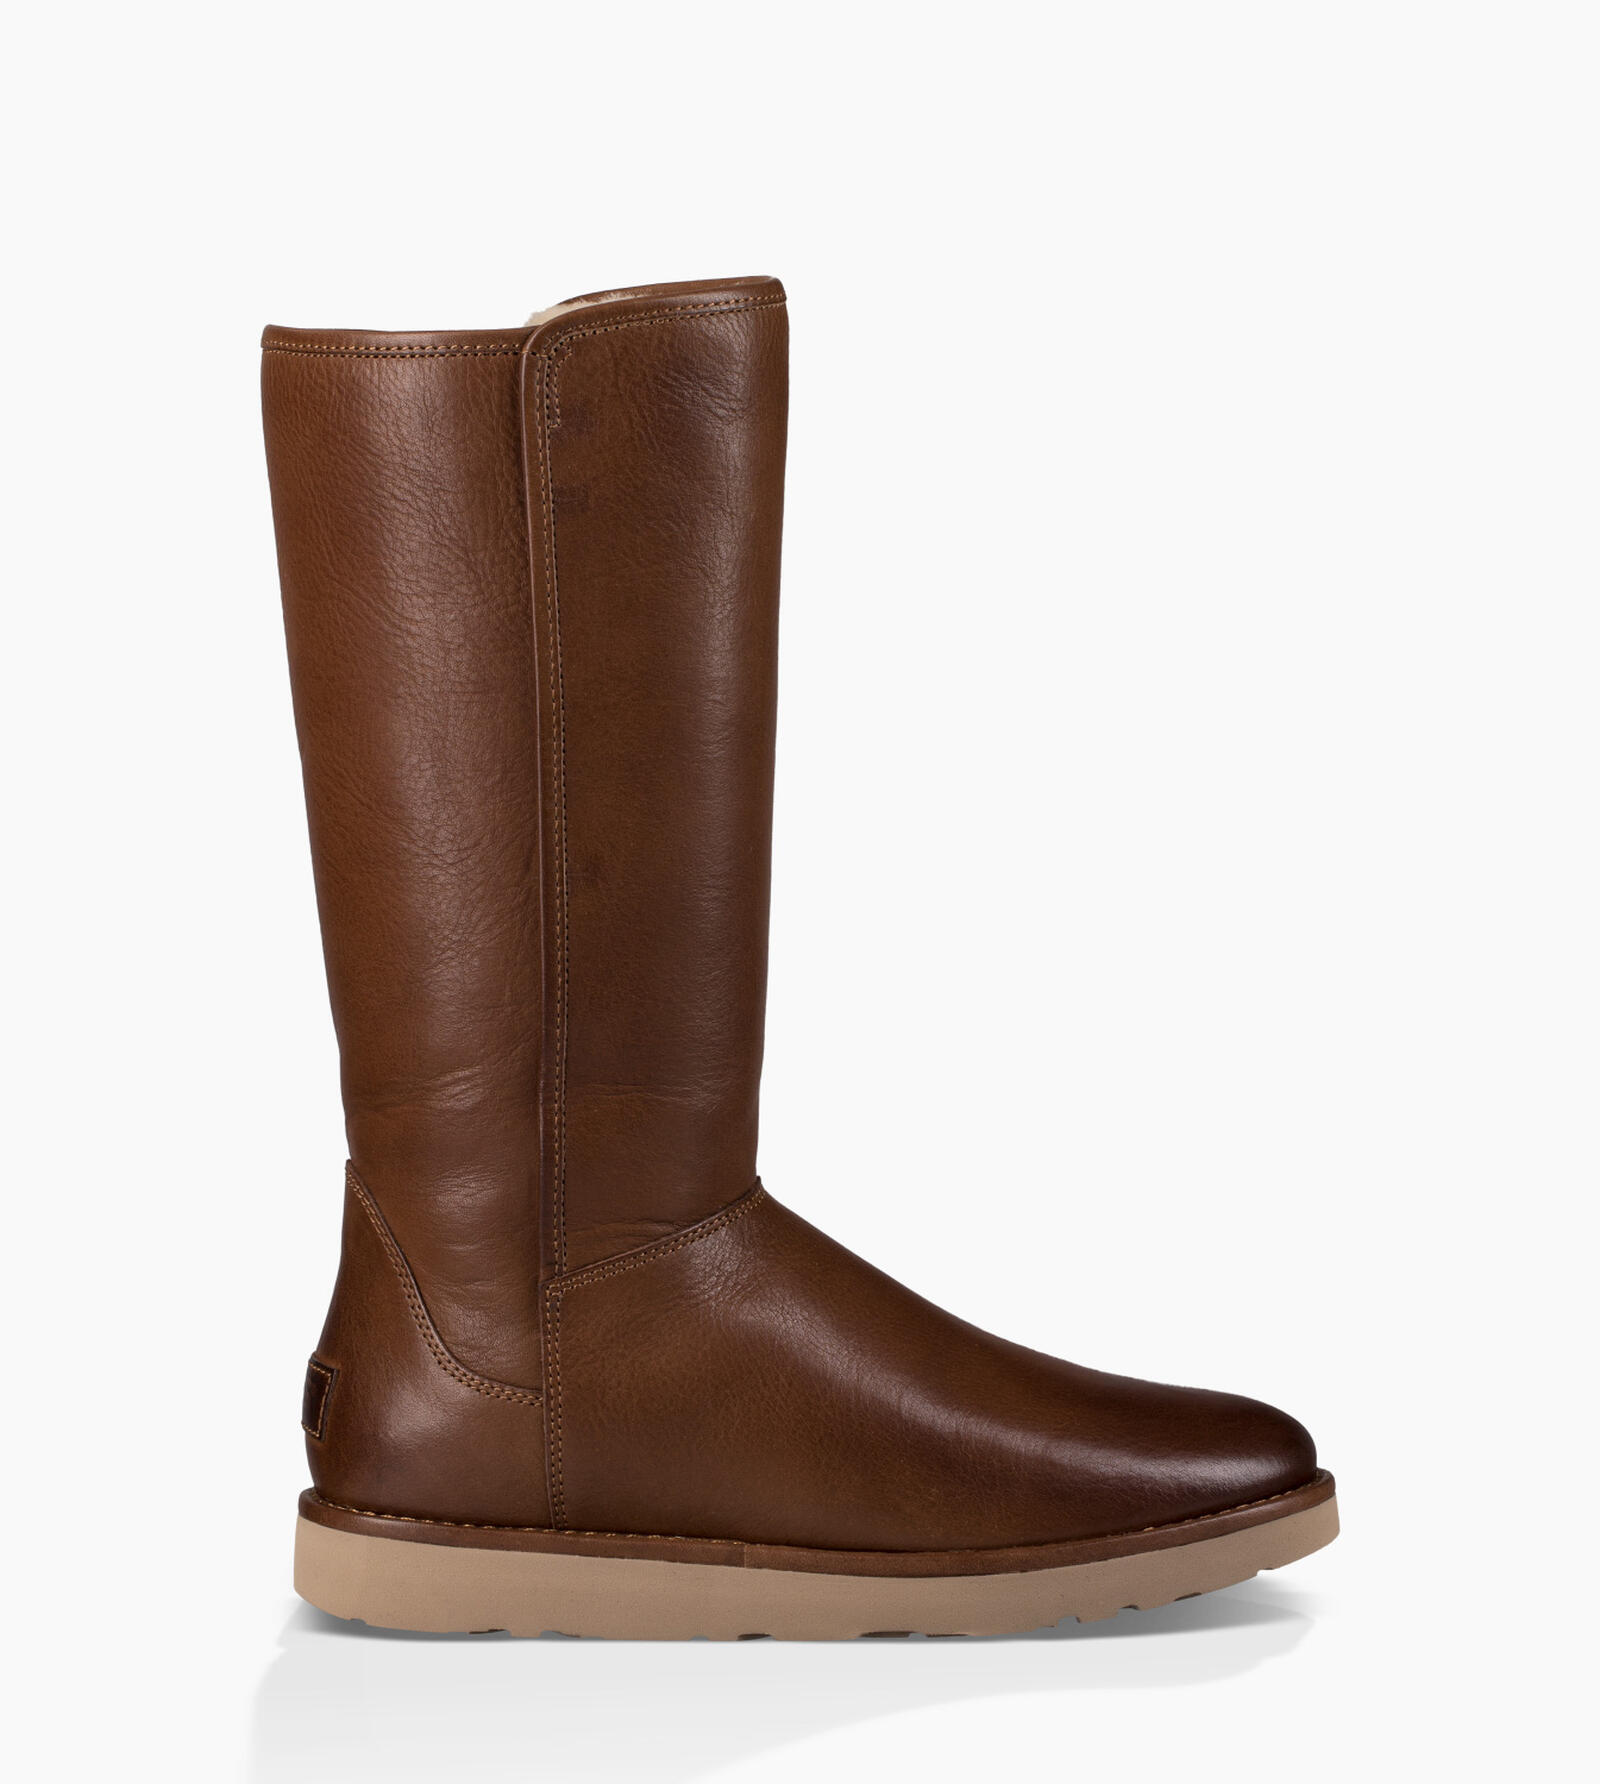 ugg boots on clearance